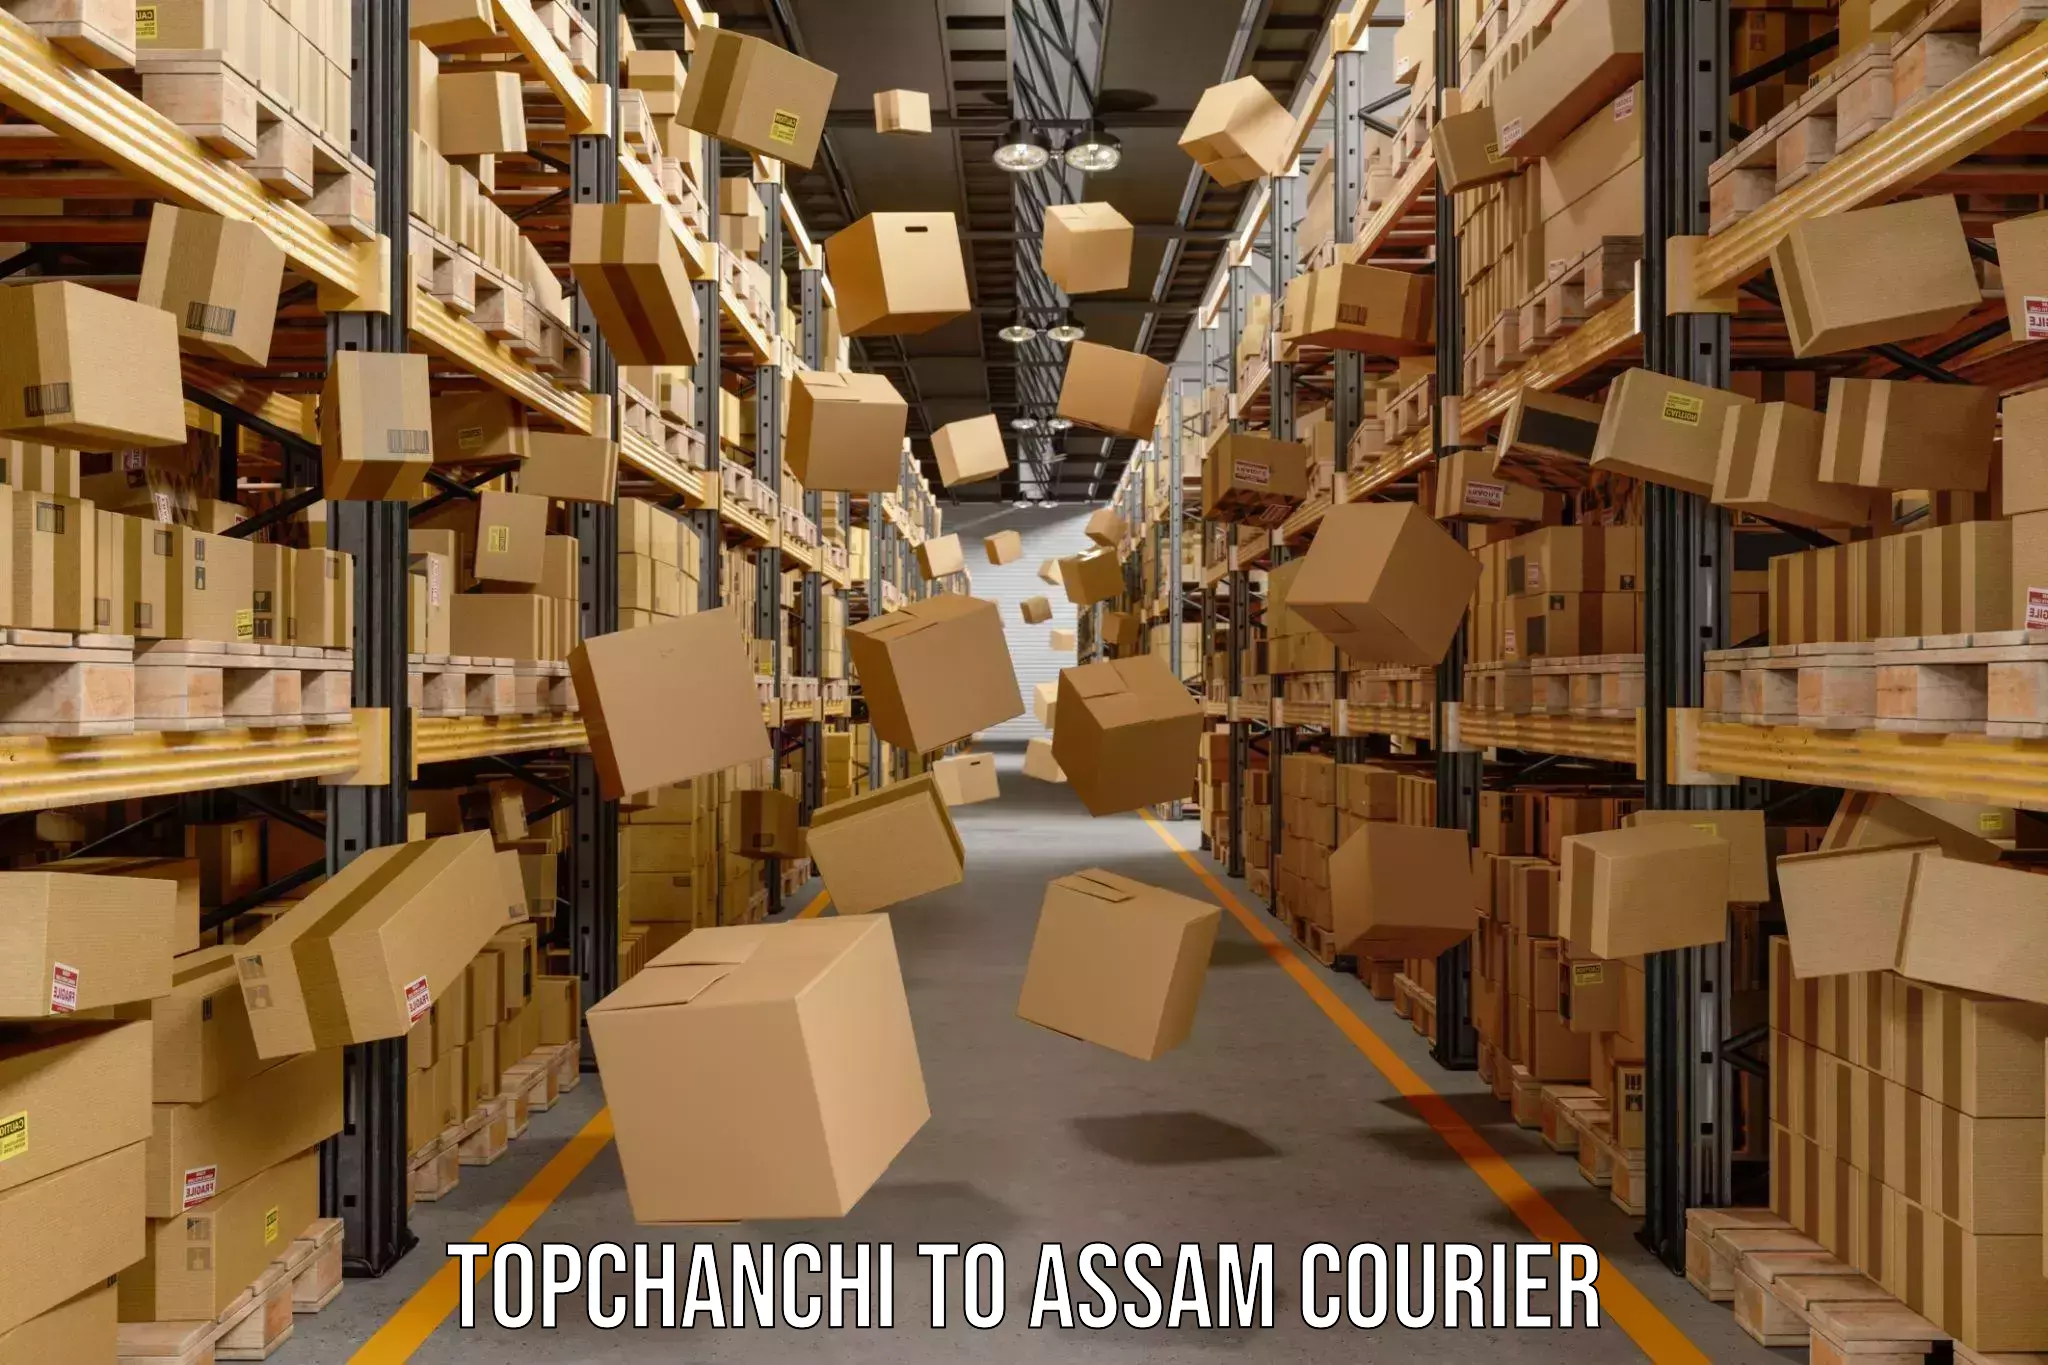 Courier service innovation Topchanchi to Assam